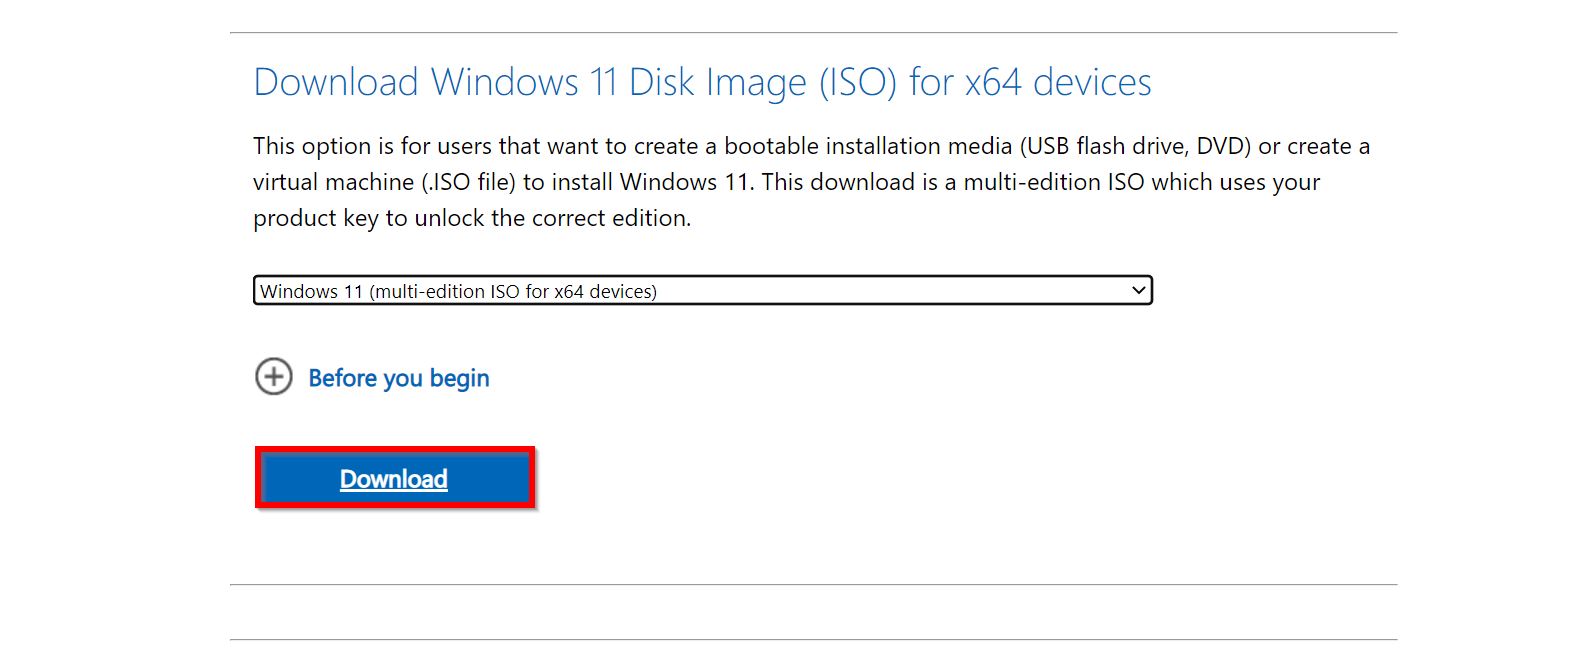 Windows 11 ISO download page.